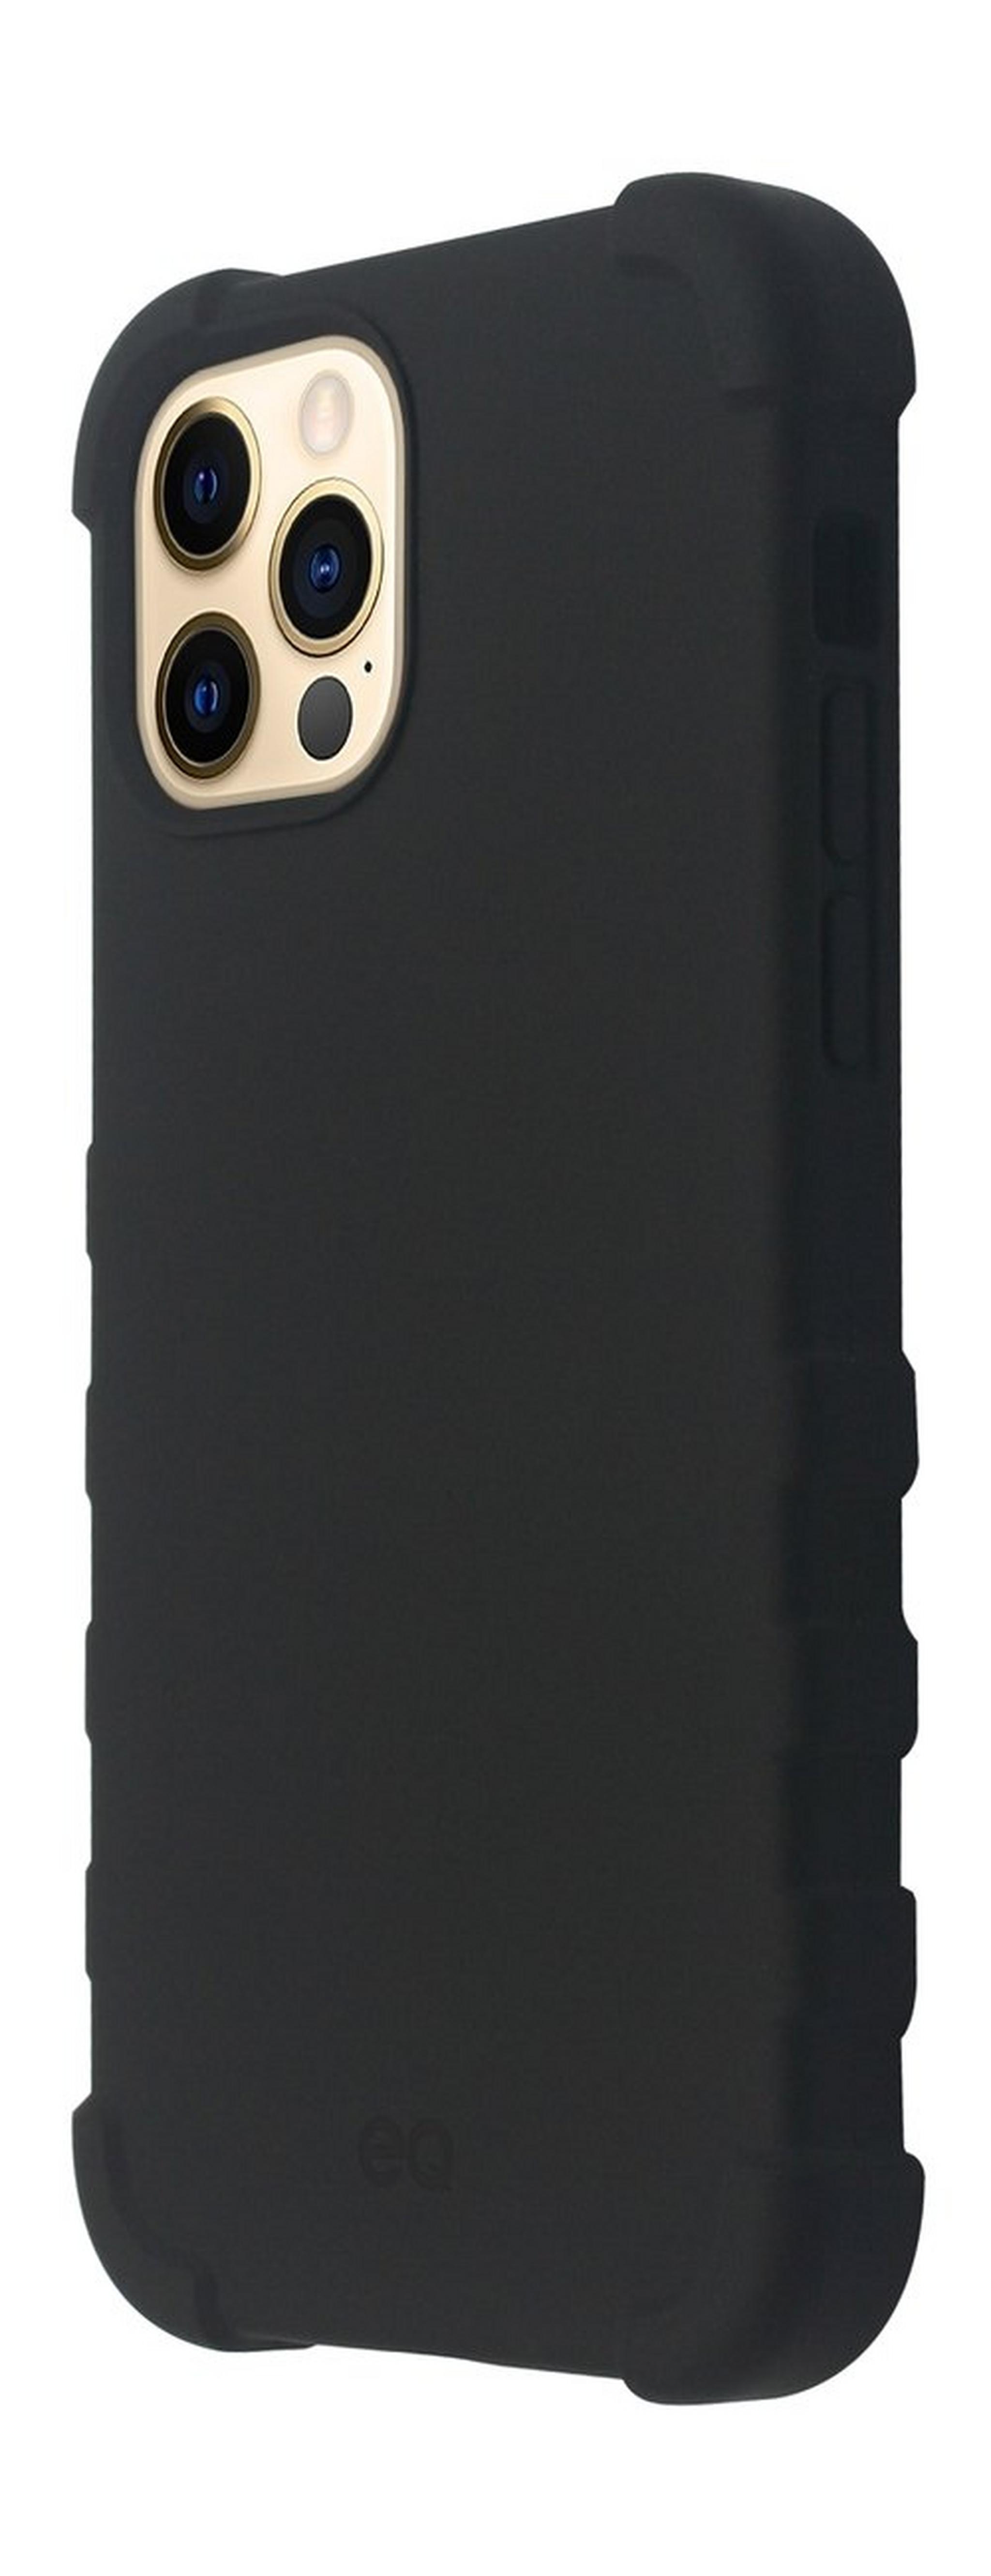 EQ Rugged Silicone Case for iPhone 12/12 Pro - Black